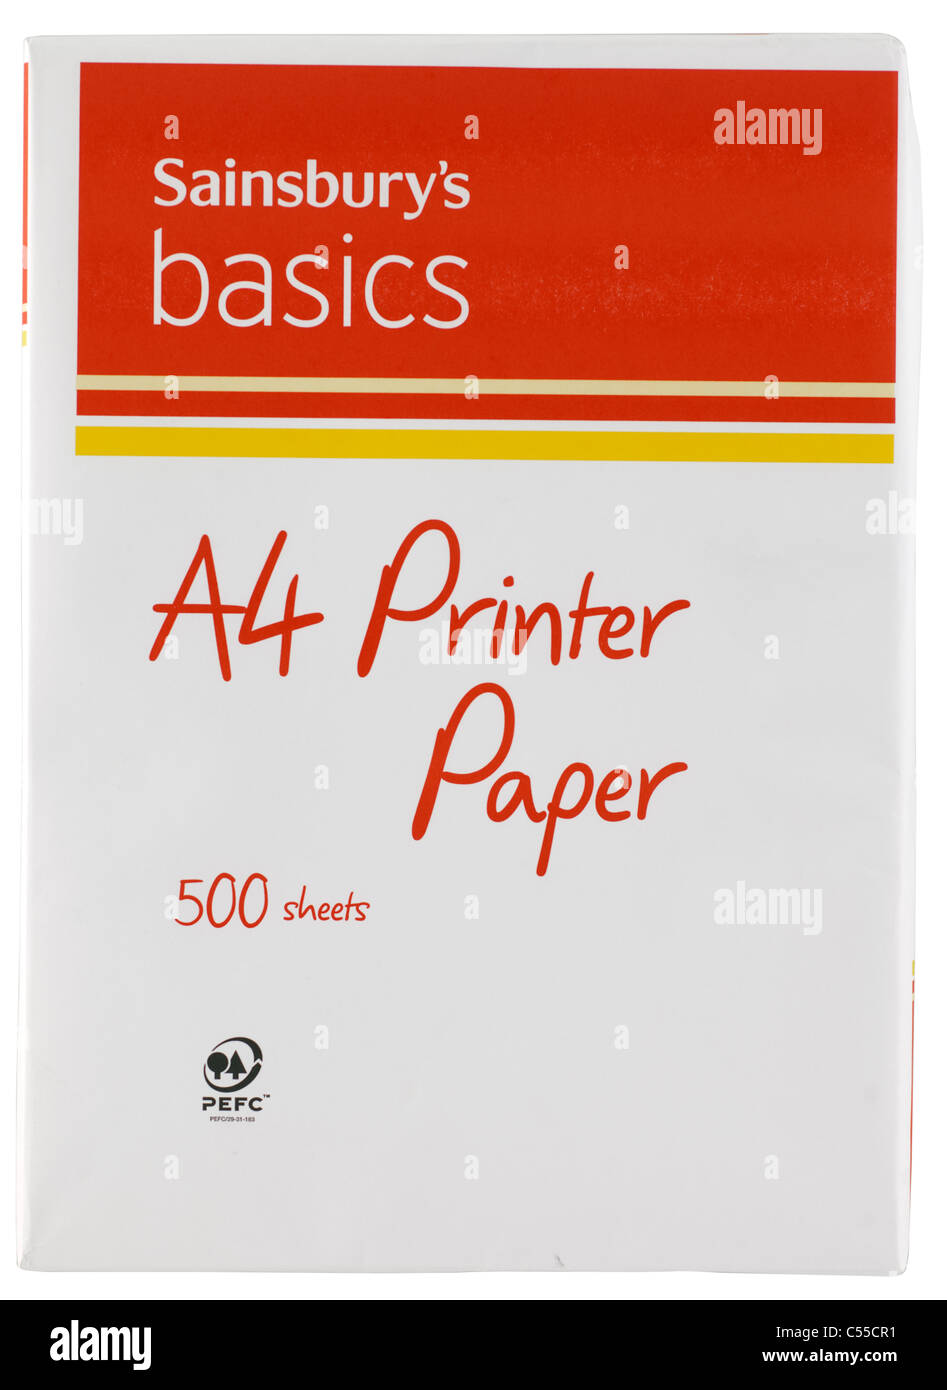 A4 printer paper pack Cut Out Stock Images & Pictures - Alamy